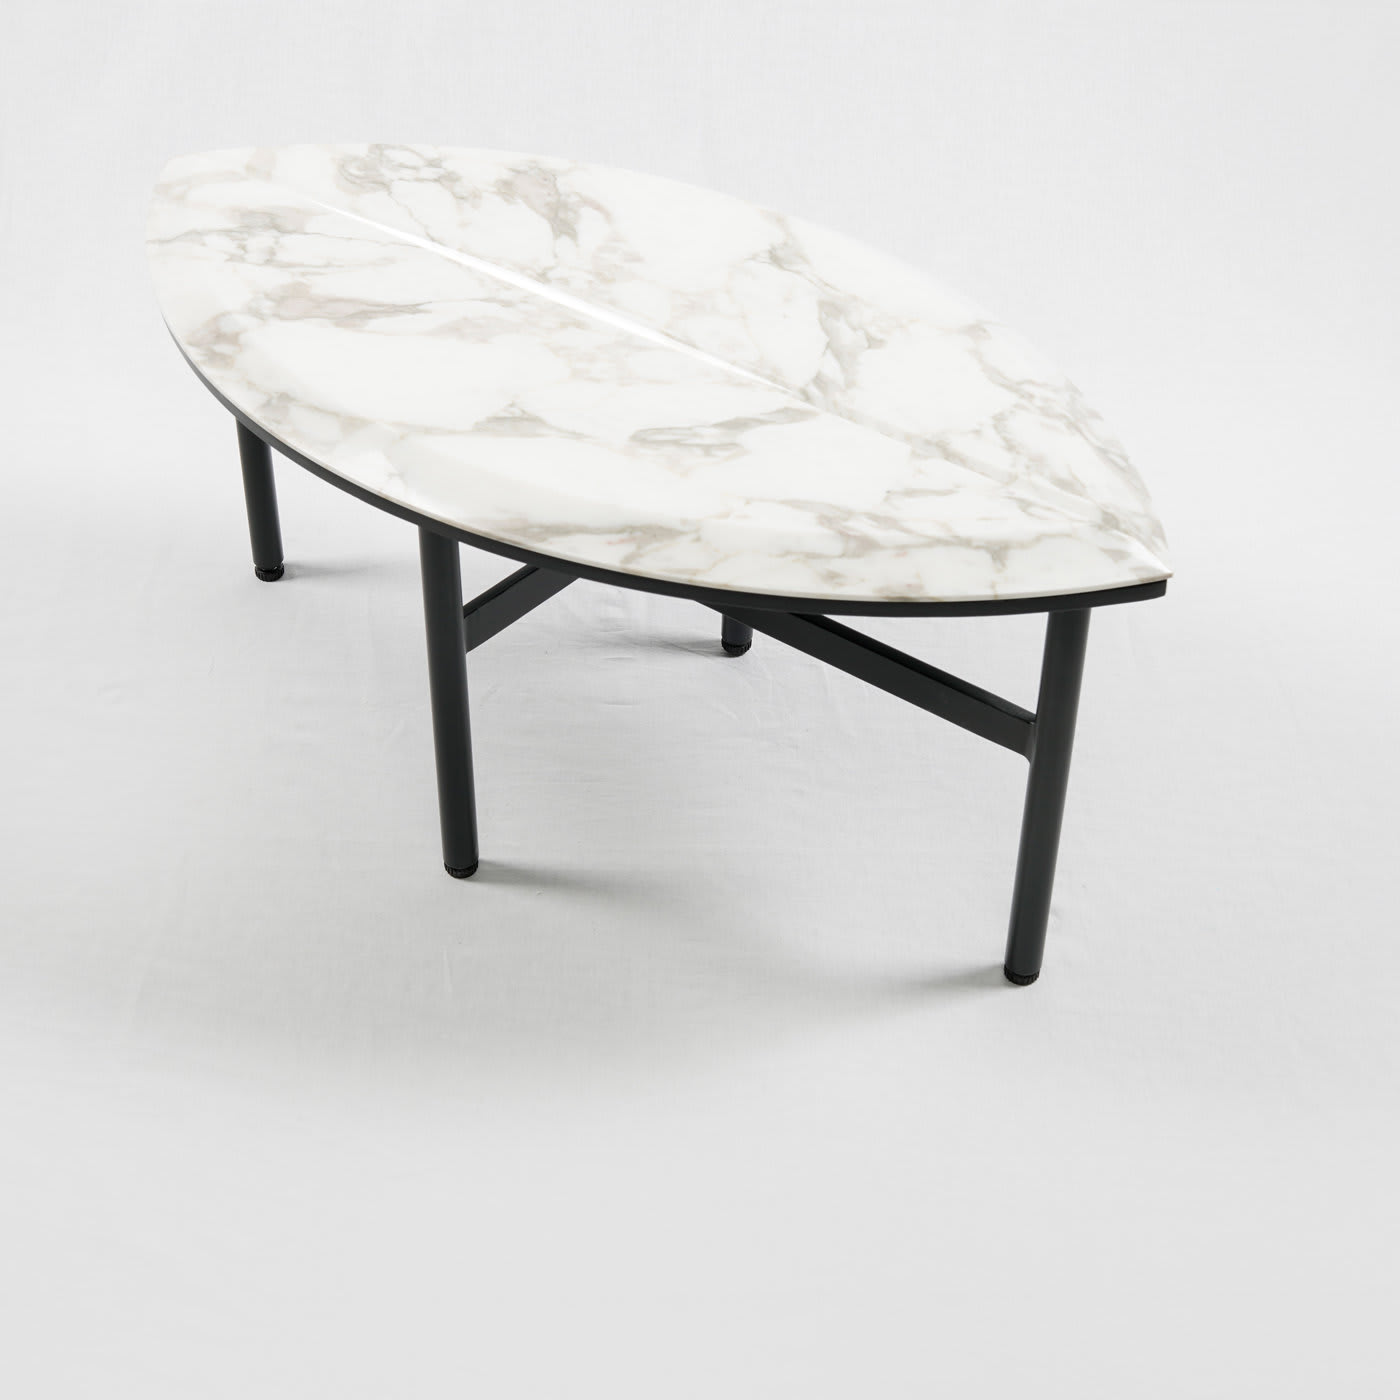 Book Two coffee table - Secolo